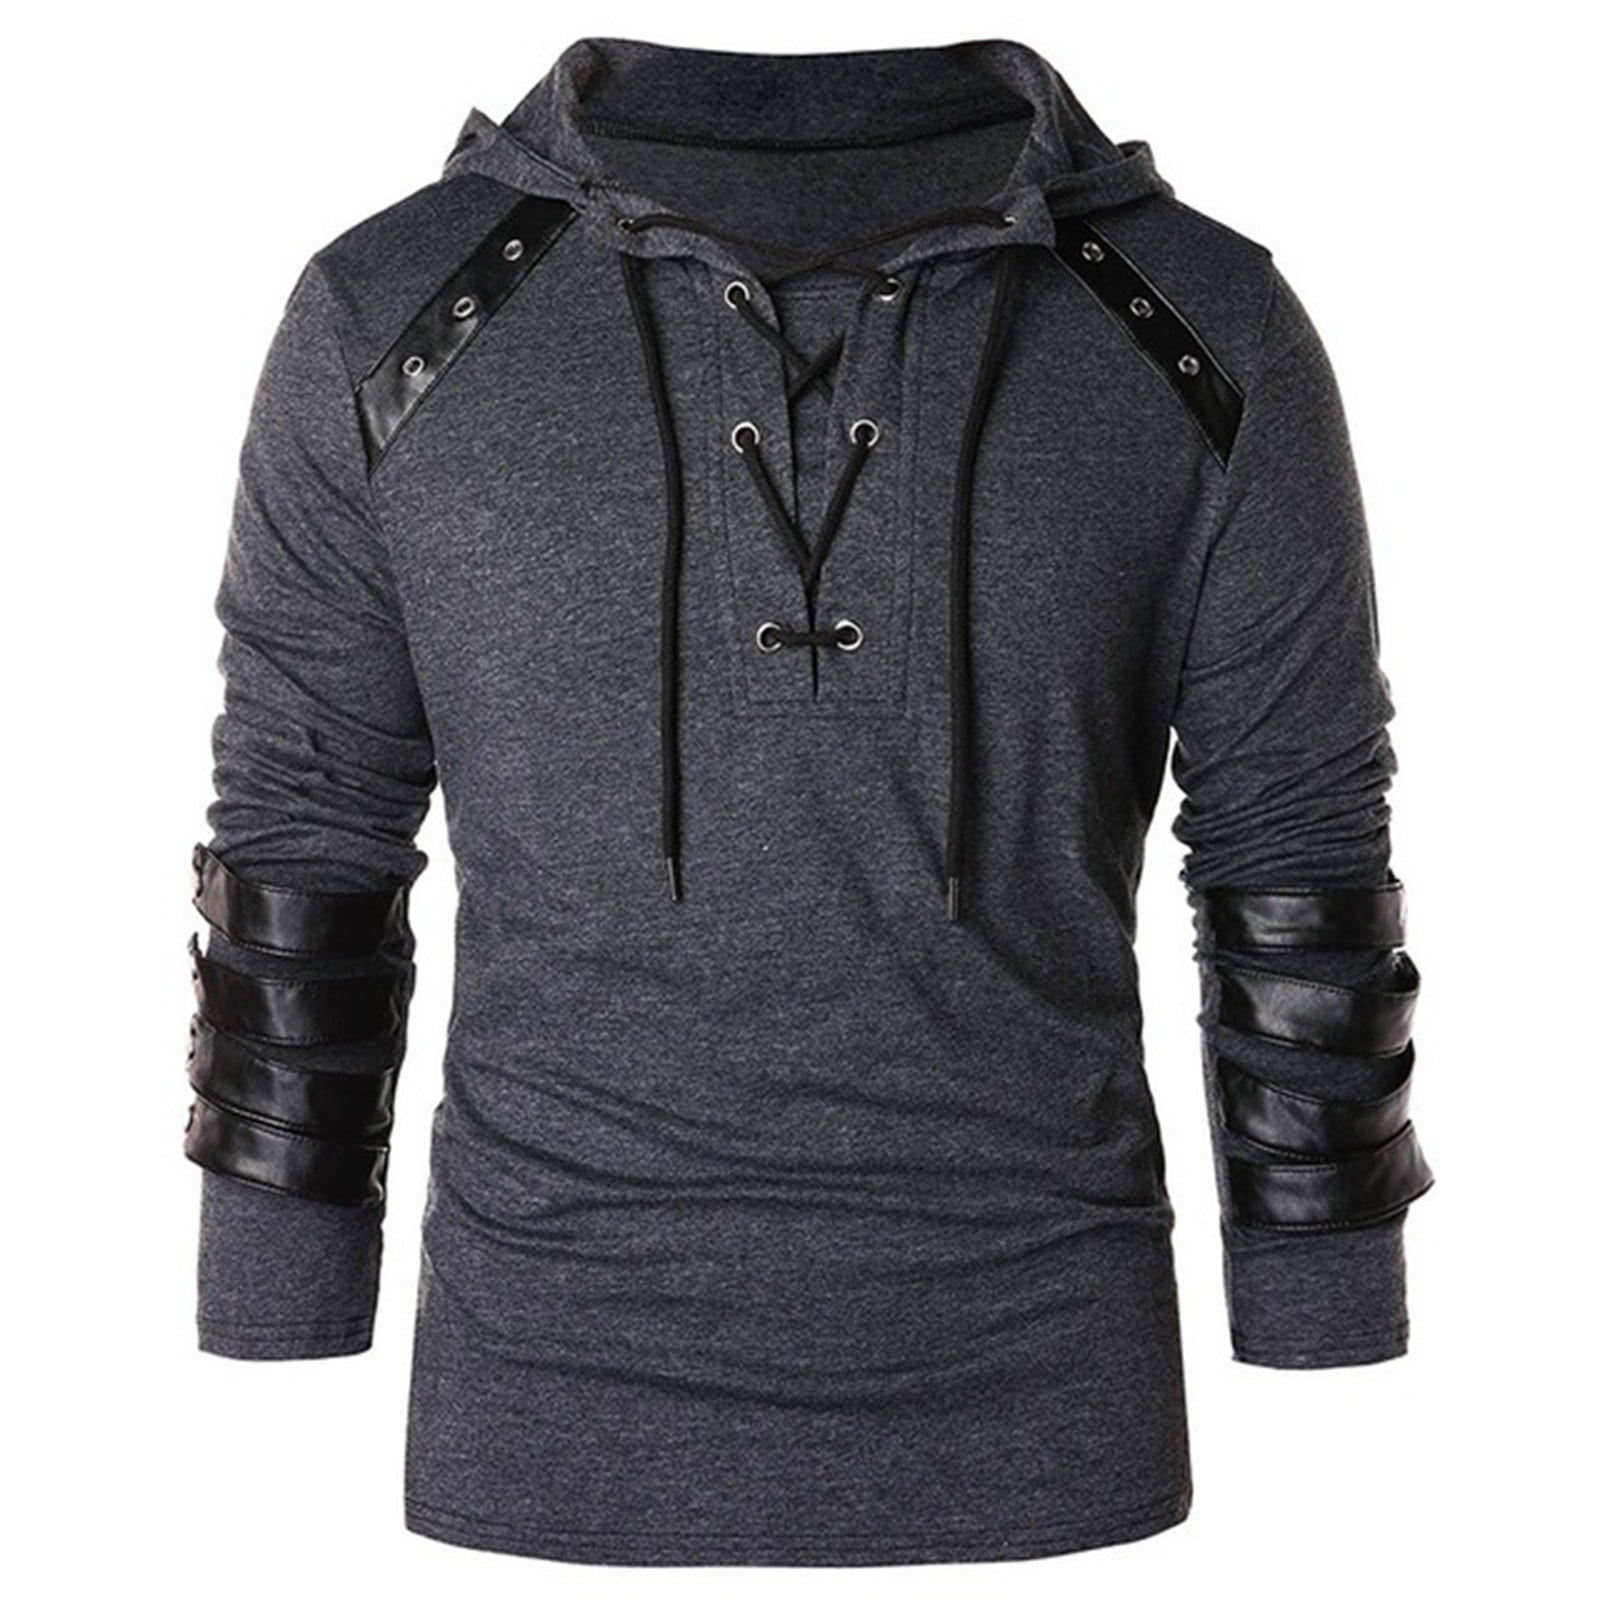 Men's Gothic Punk Hoodie,Mens Medieval Pirate Shirt Lace Up, Mens Gothic  Clothing Vintage Steampunk Shirts Sweatshirt Long Sleeve Pullover Tops 